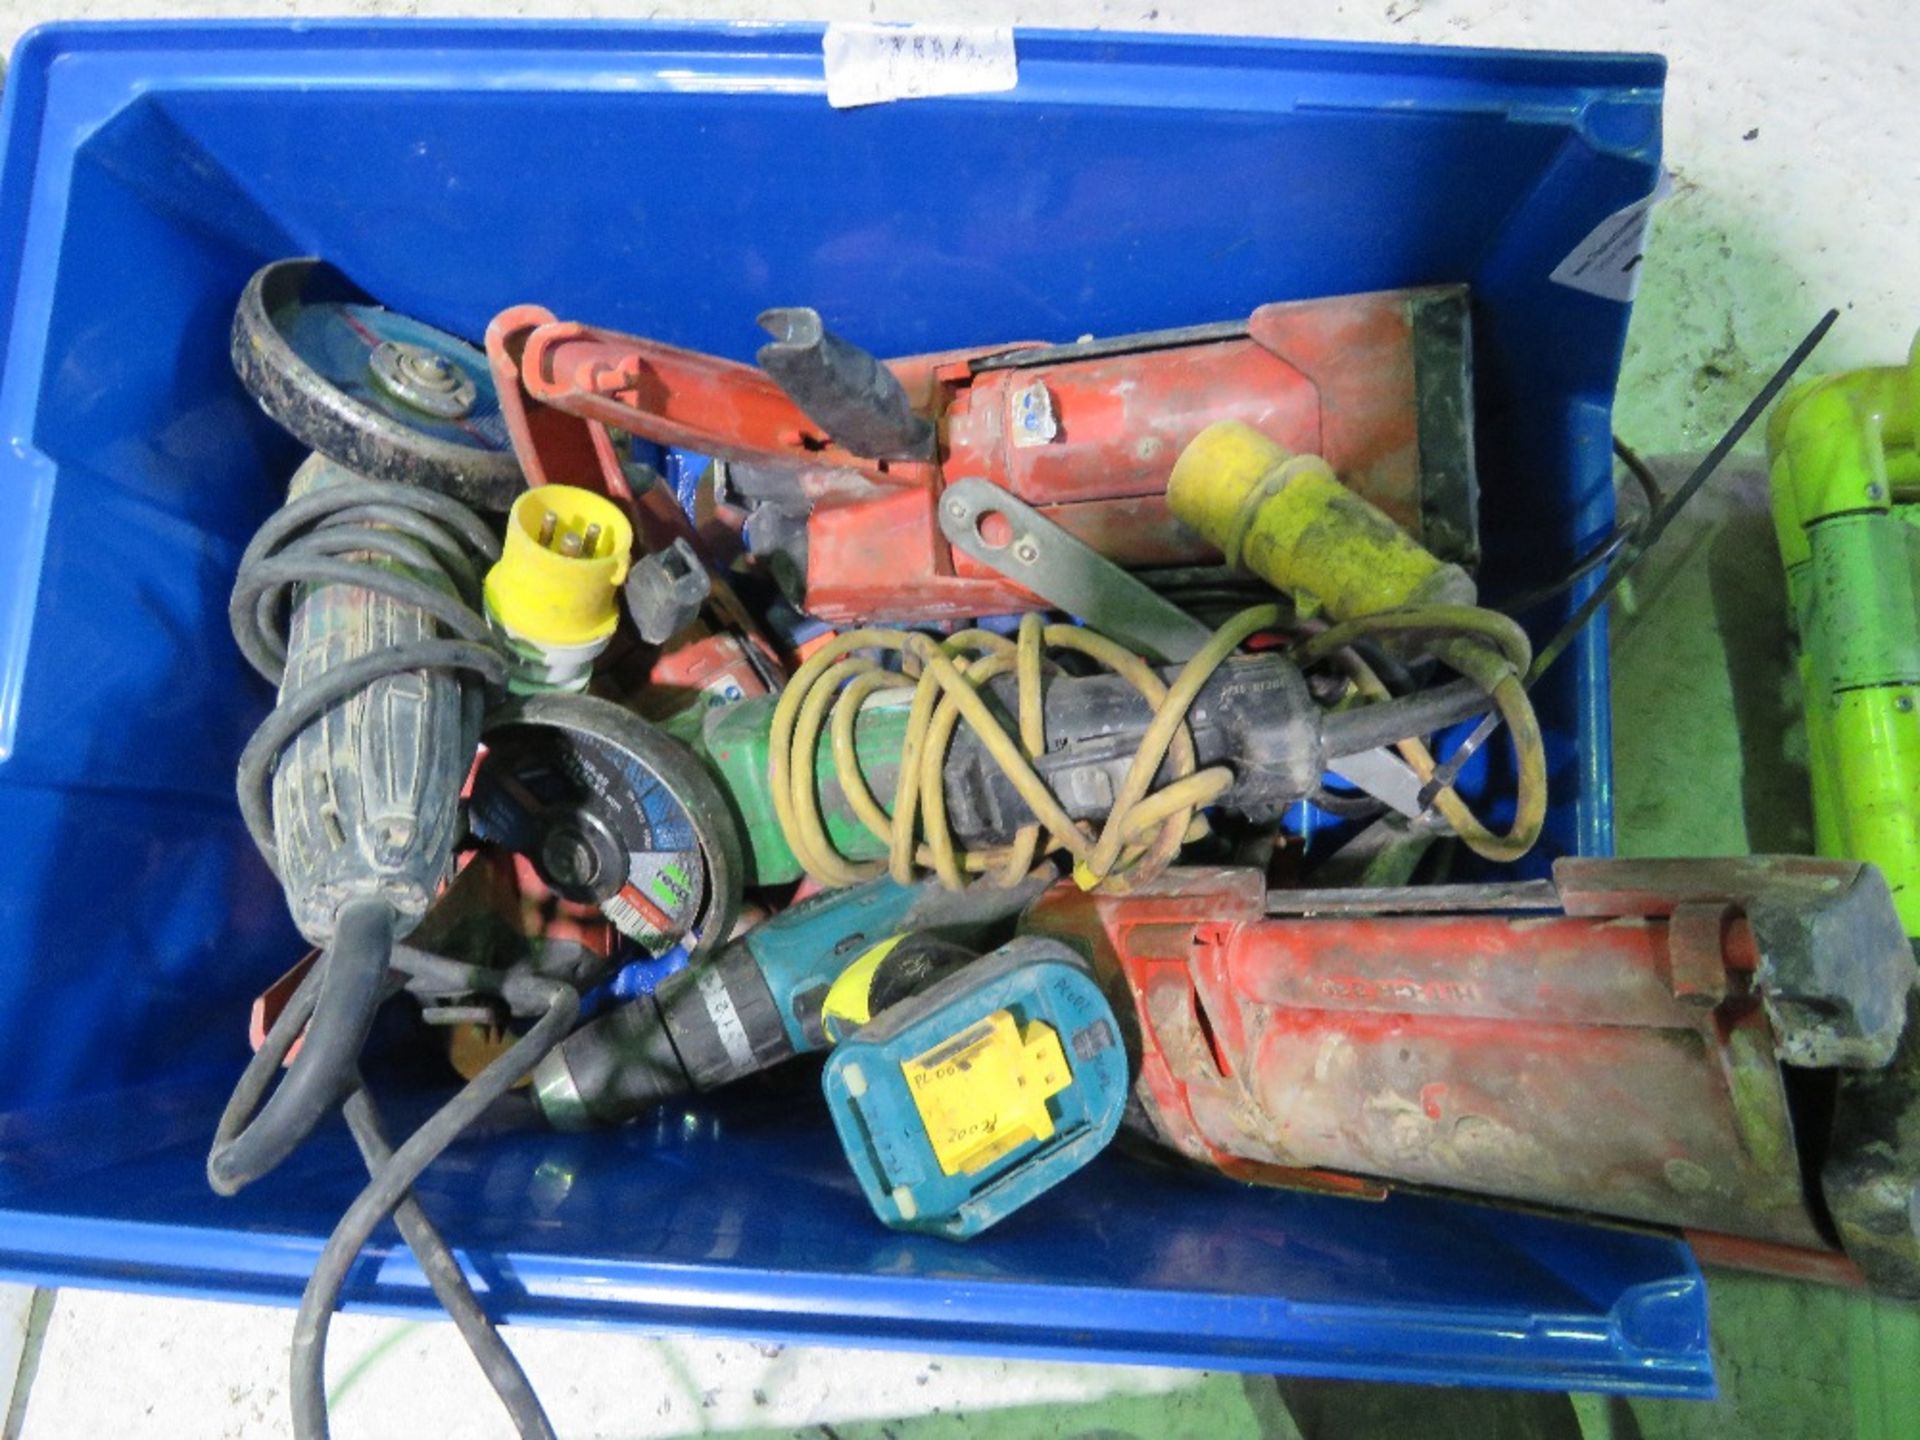 4 X HILTI MASTIC GUNS PLUS POWER TOOLS. SOURCED FROM COMPANY LIQUIDATION. THIS LOT IS SOLD UNDER - Image 6 of 7